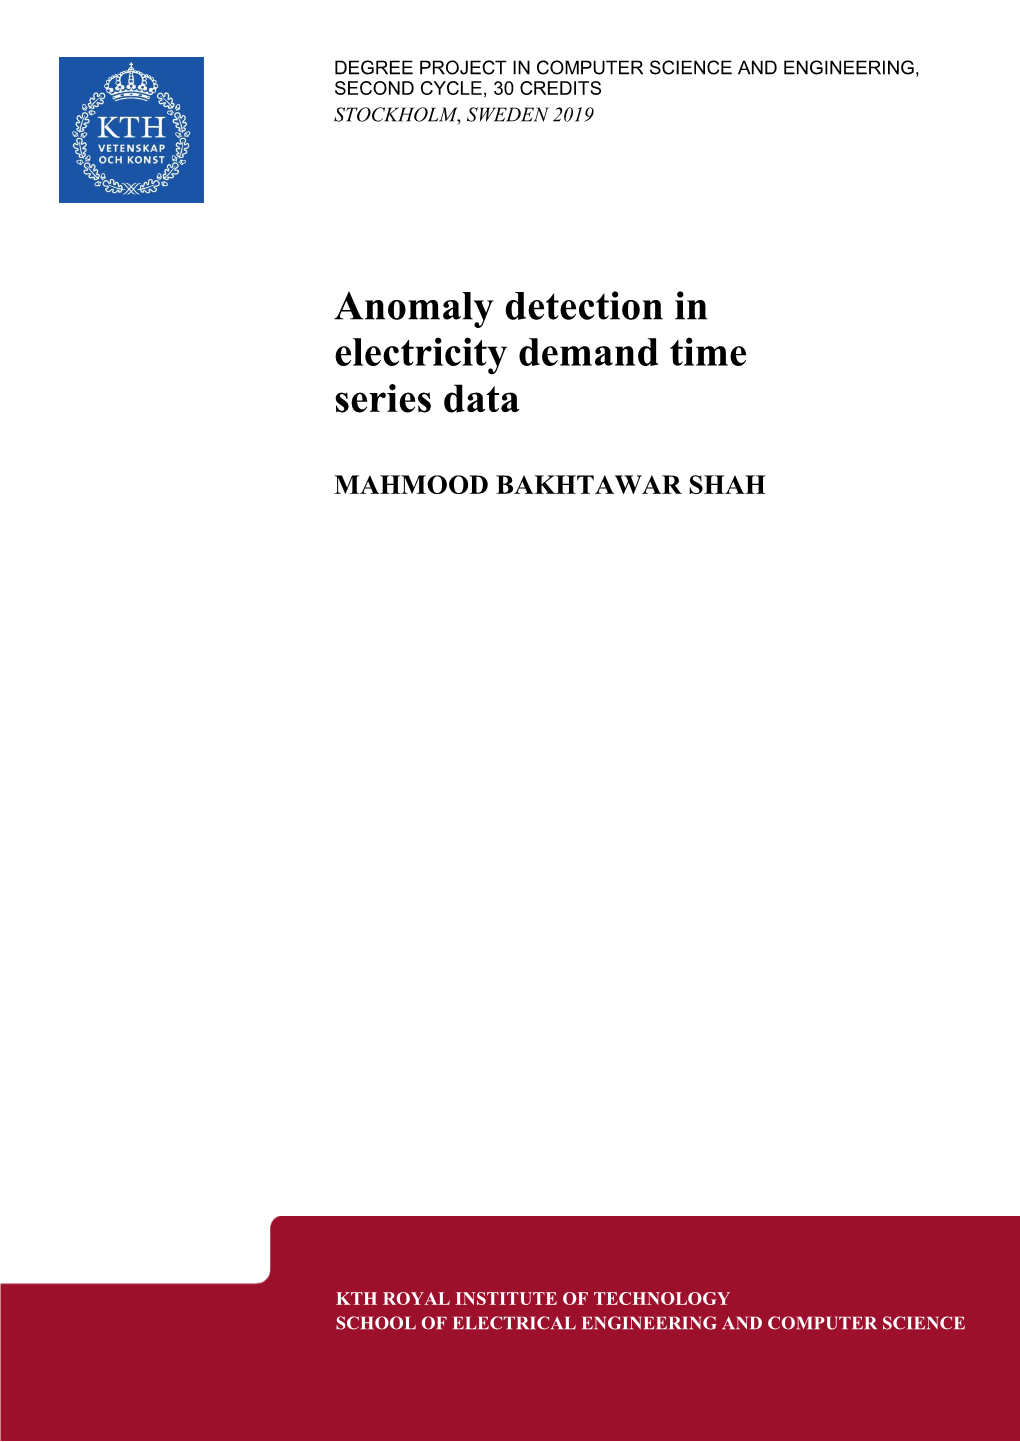 Anomaly Detection in Electricity Demand Time Series Data